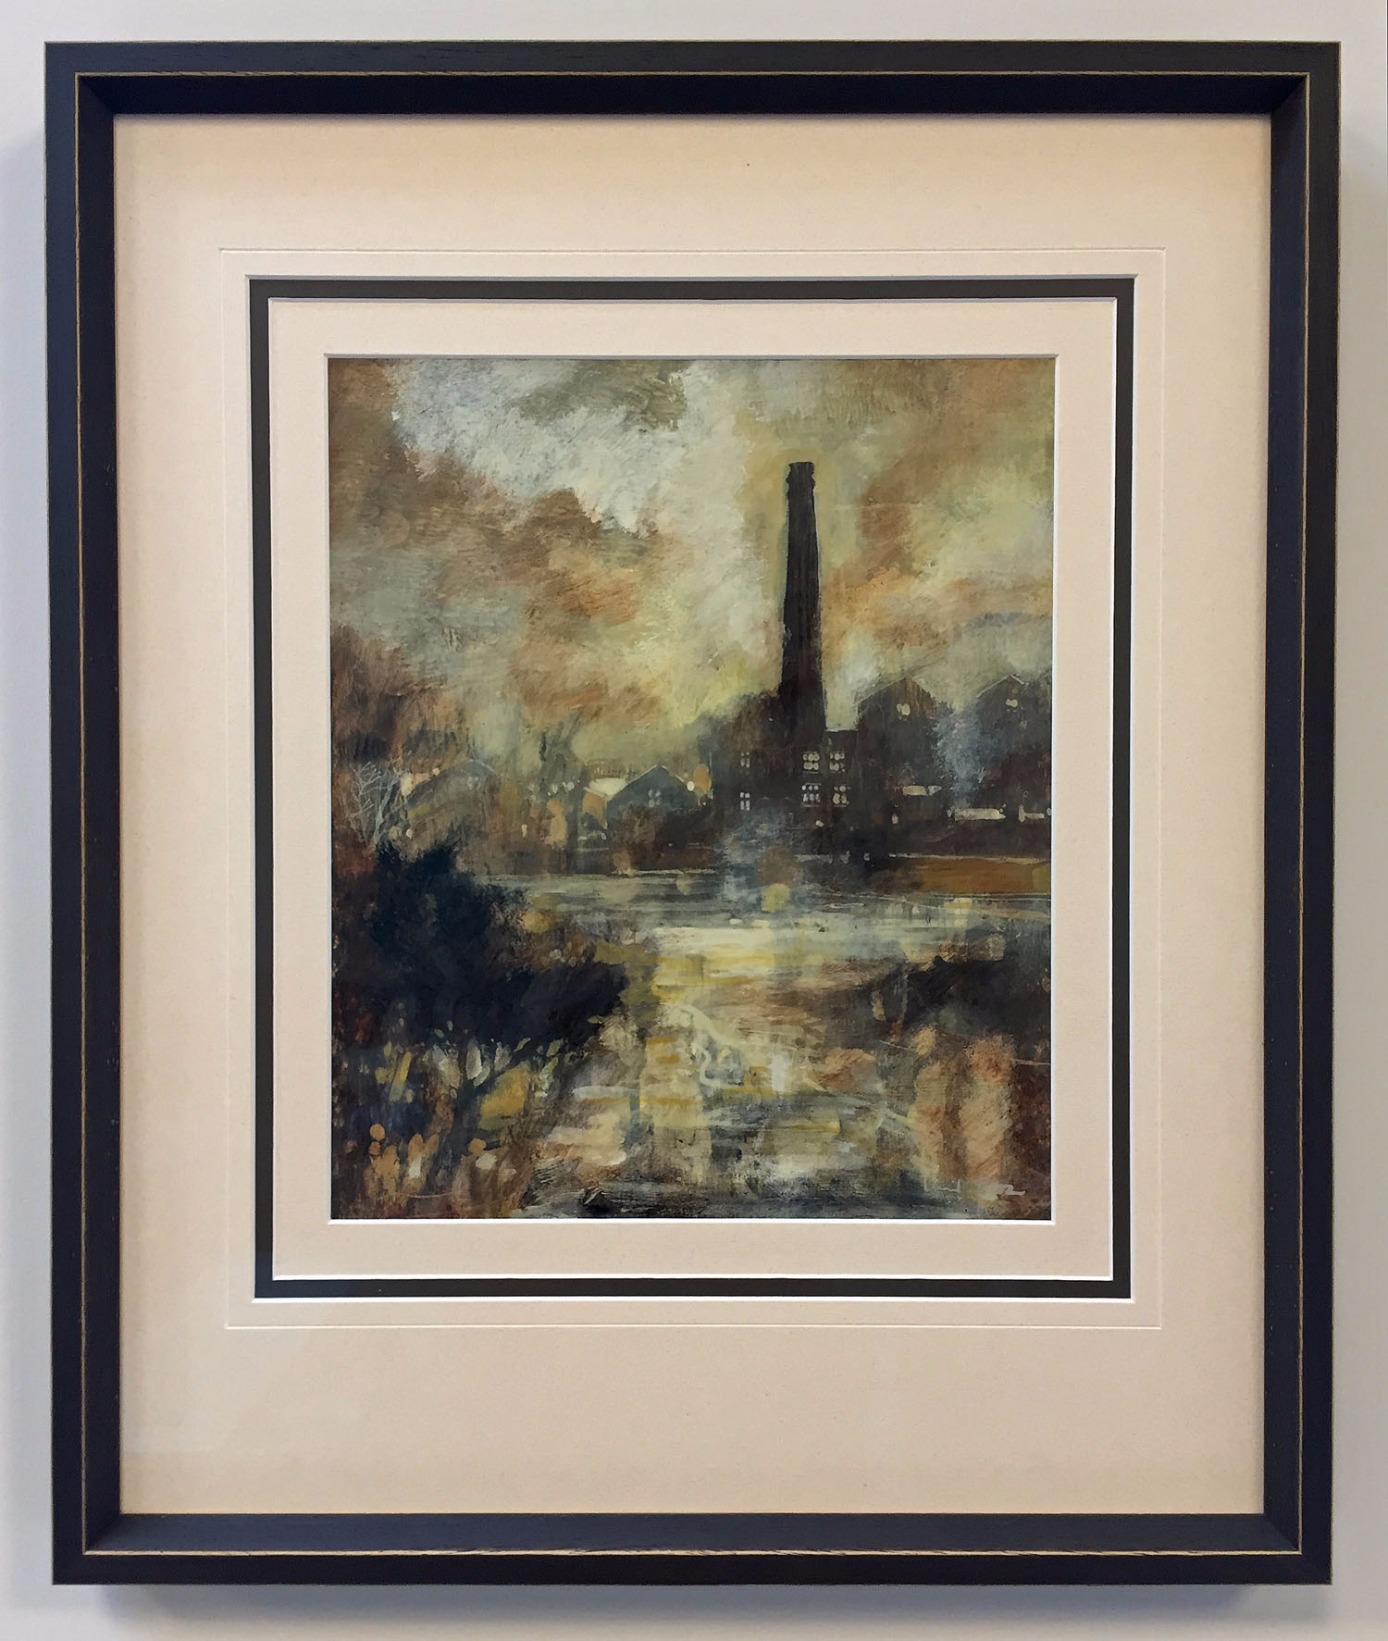 Standing Tall by David Bez, Water | Landscape | Northern | Industrial | Local